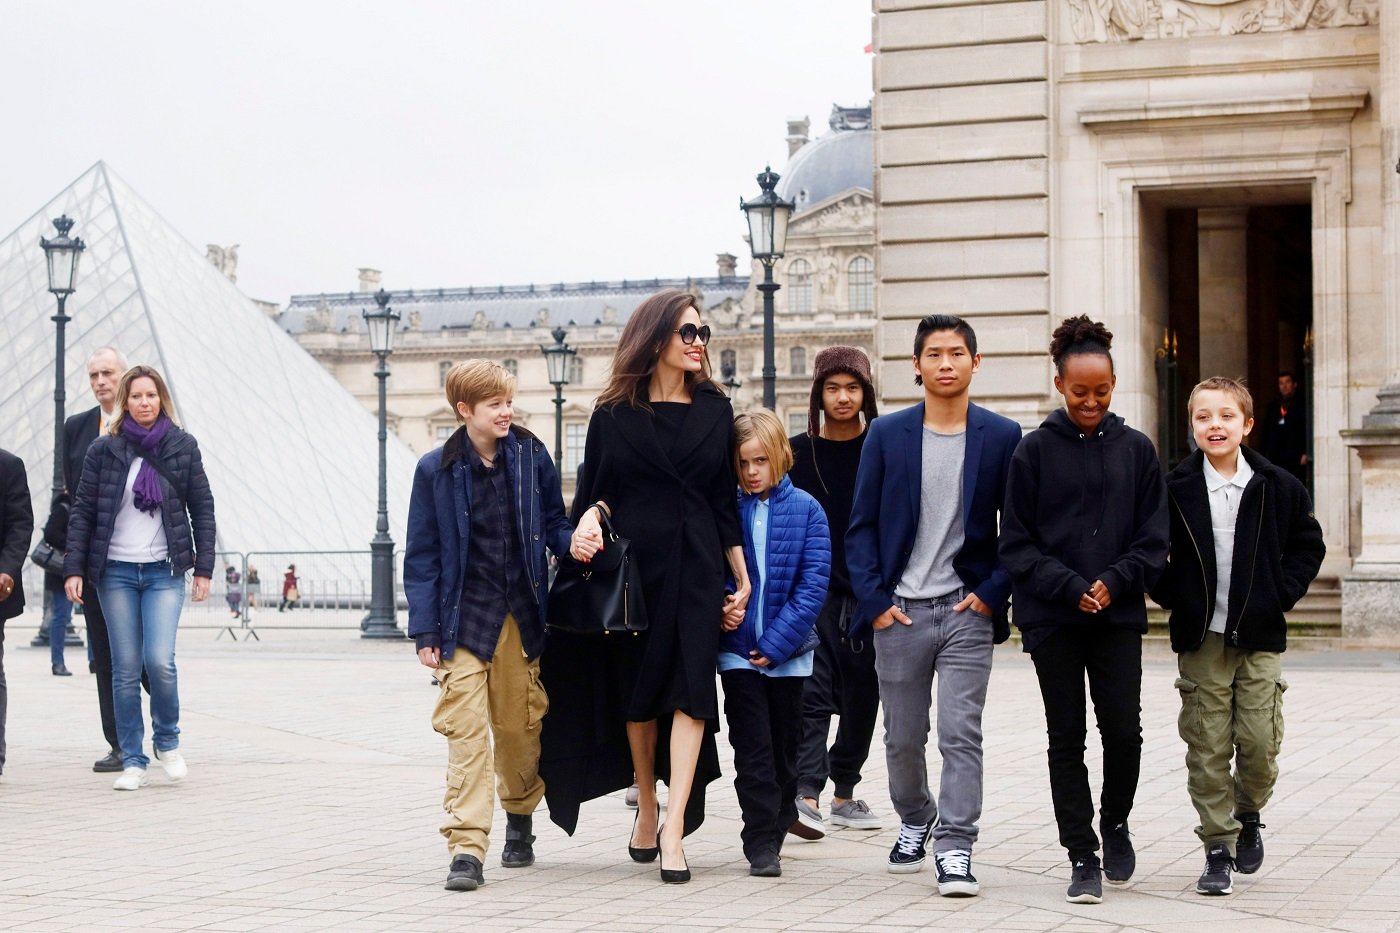 Angelina Jolie with Shiloh, Maddox, Vivienne Marcheline, Pax Thien, Zahara Marley, and Knox Leon Jolie-Pitt visit the Louvre in Paris, France, on January 30, 2017 | Photo: Mehdi Taamallah/NurPhoto/Getty Images